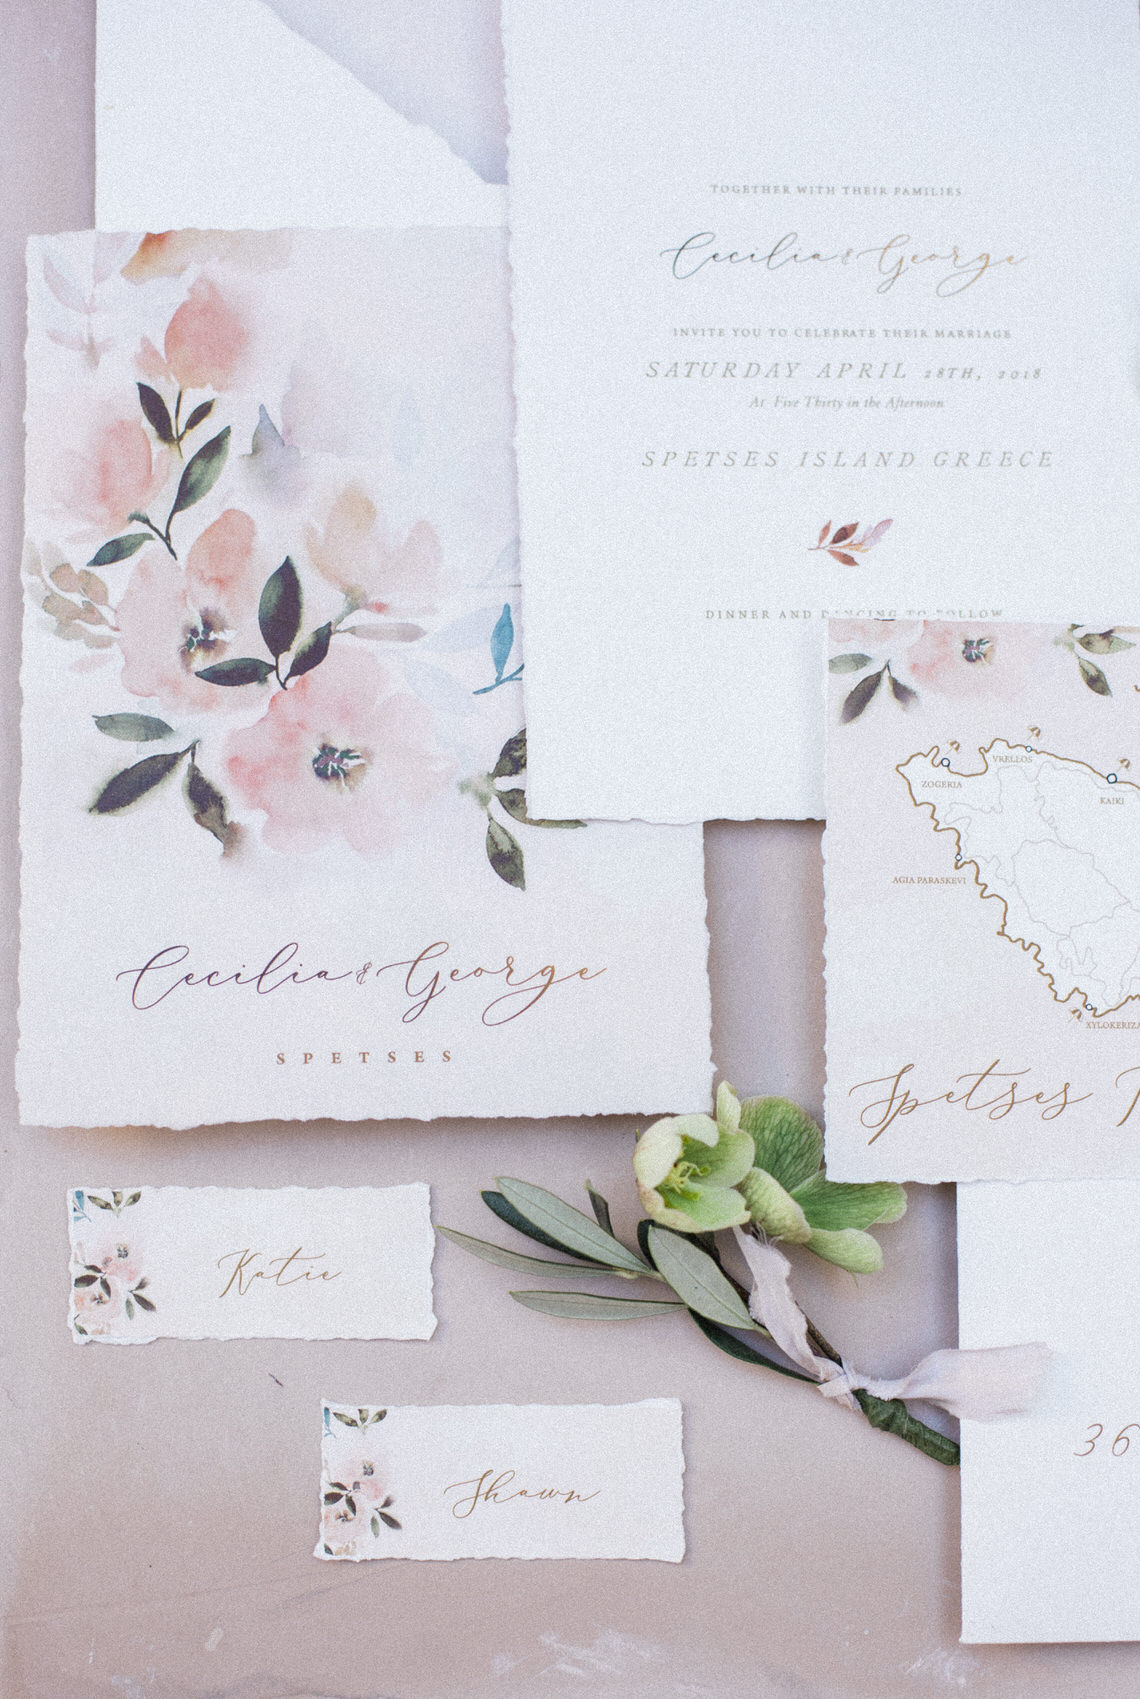 Whimsical Romantic Wedding Inspiration With Grace Kelly Vibes – Fiorello Photography 21